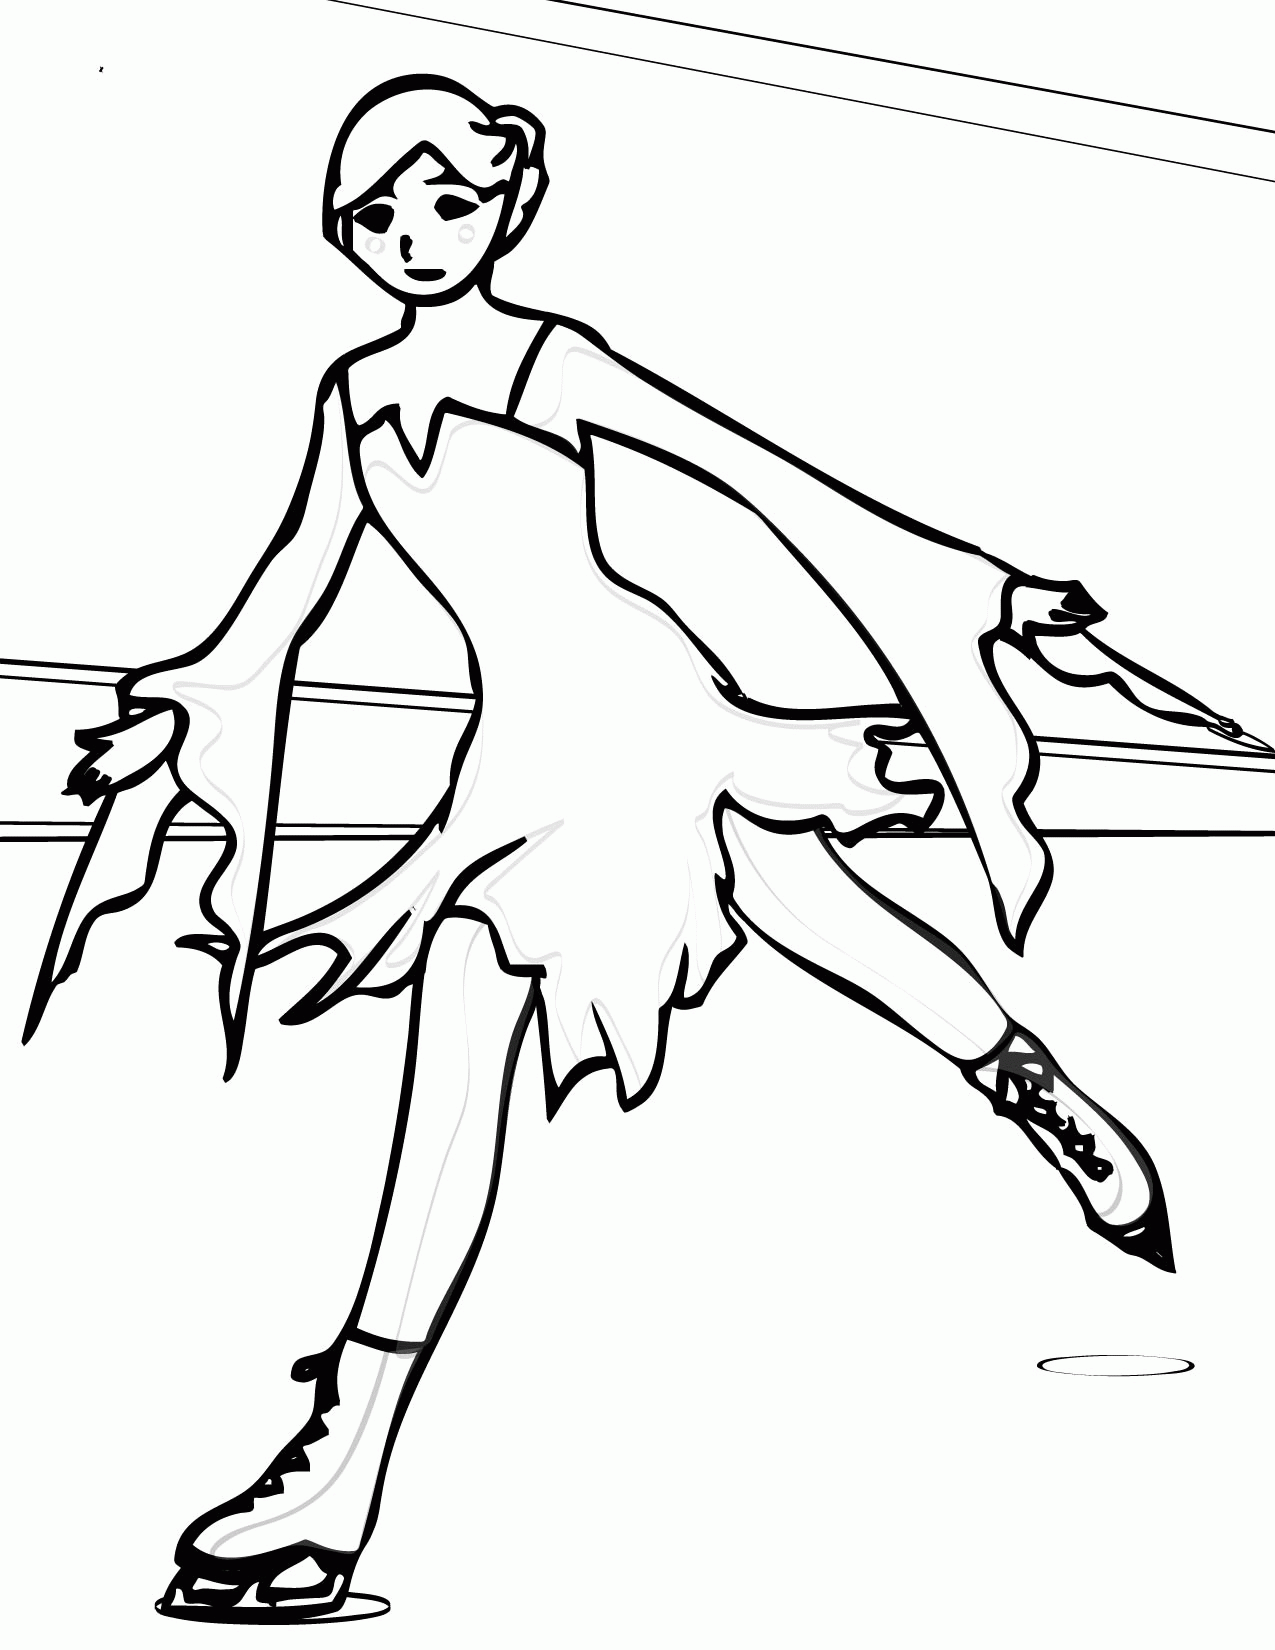 free-ice-skating-coloring-pages-download-free-ice-skating-coloring